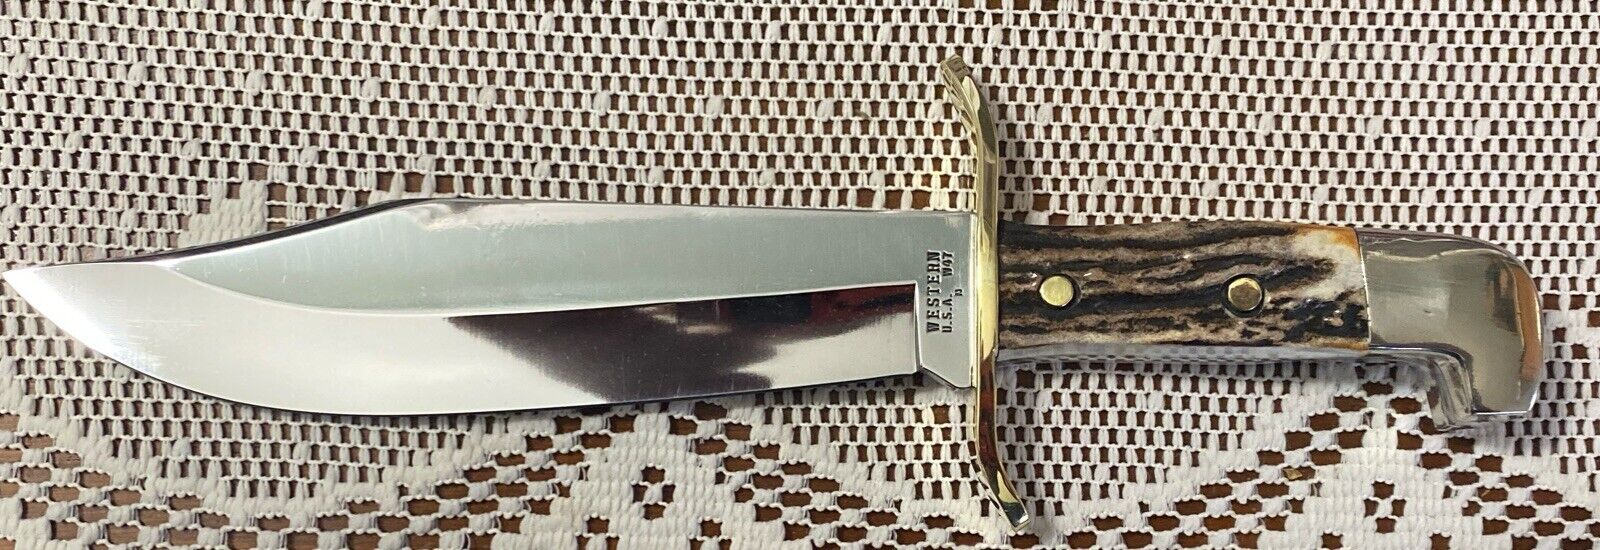 Rare Custom Western Knife W47 Bowie With Stag Handle Beautiful Knife See Desc